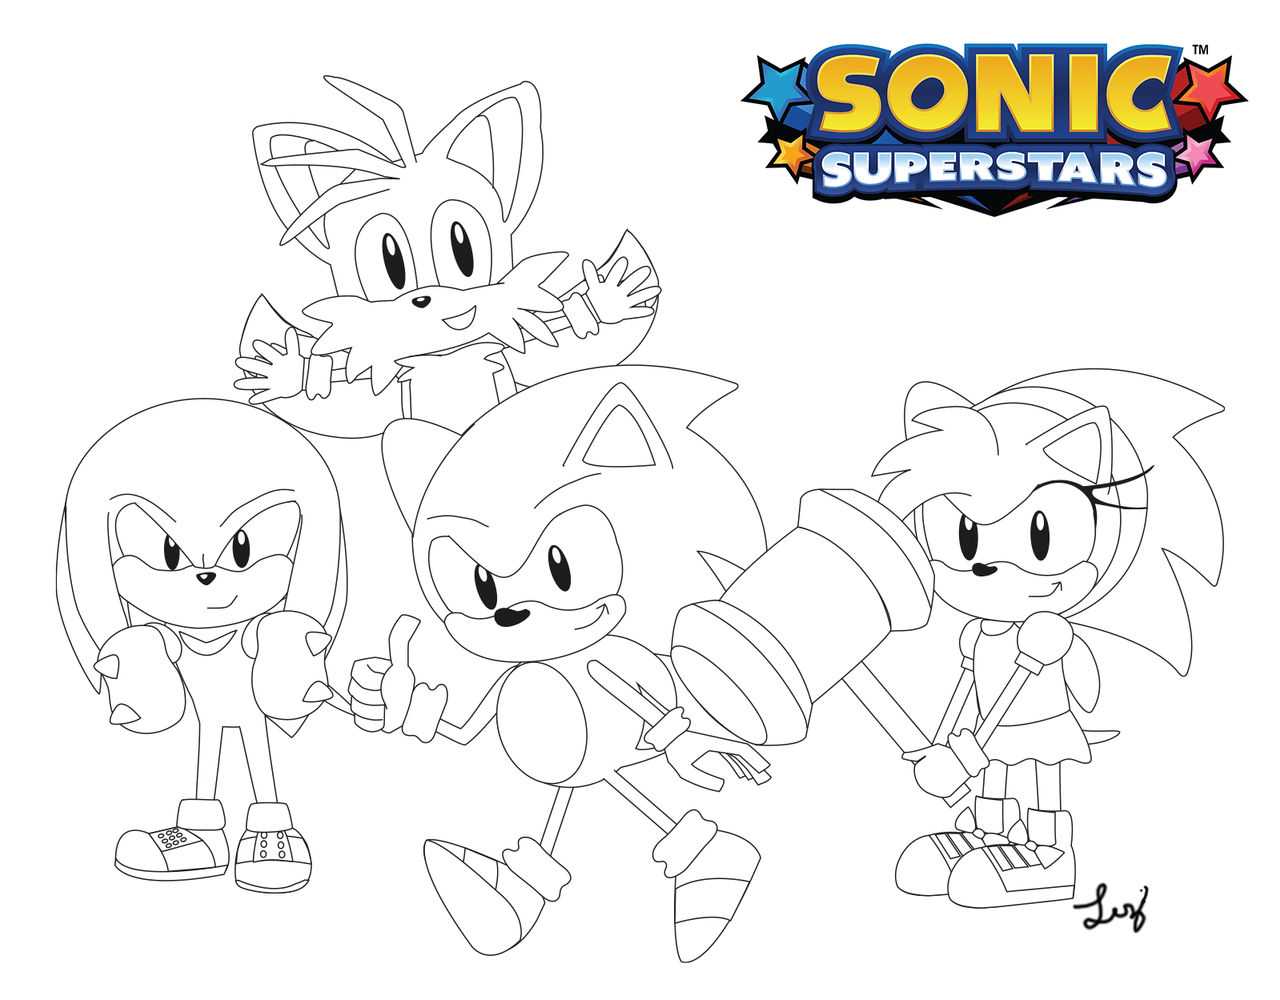 Sketch Page Sonic Frontiers Final Horizon by NP by NonicPower on